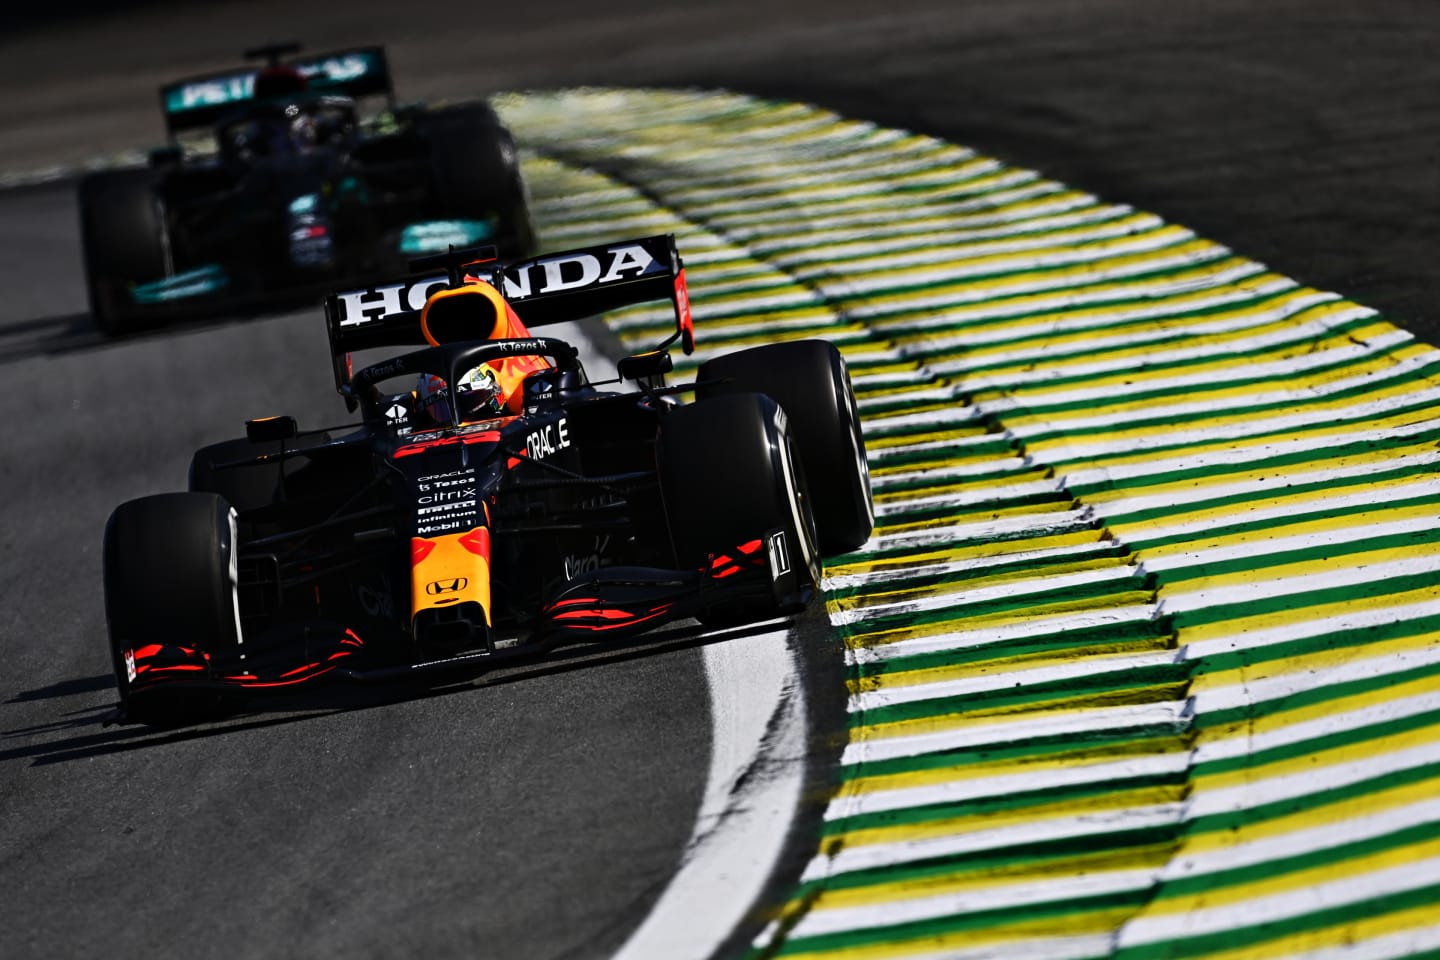 SAO PAULO, BRAZIL - NOVEMBER 14: Max Verstappen of the Netherlands driving the (33) Red Bull Racing RB16B Honda leads Lewis Hamilton of Great Britain driving the (44) Mercedes AMG Petronas F1 Team Mercedes W12 during the F1 Grand Prix of Brazil at Autodromo Jose Carlos Pace on November 14, 2021 in Sao Paulo, Brazil. (Photo by Clive Mason - Formula 1/Formula 1 via Getty Images)